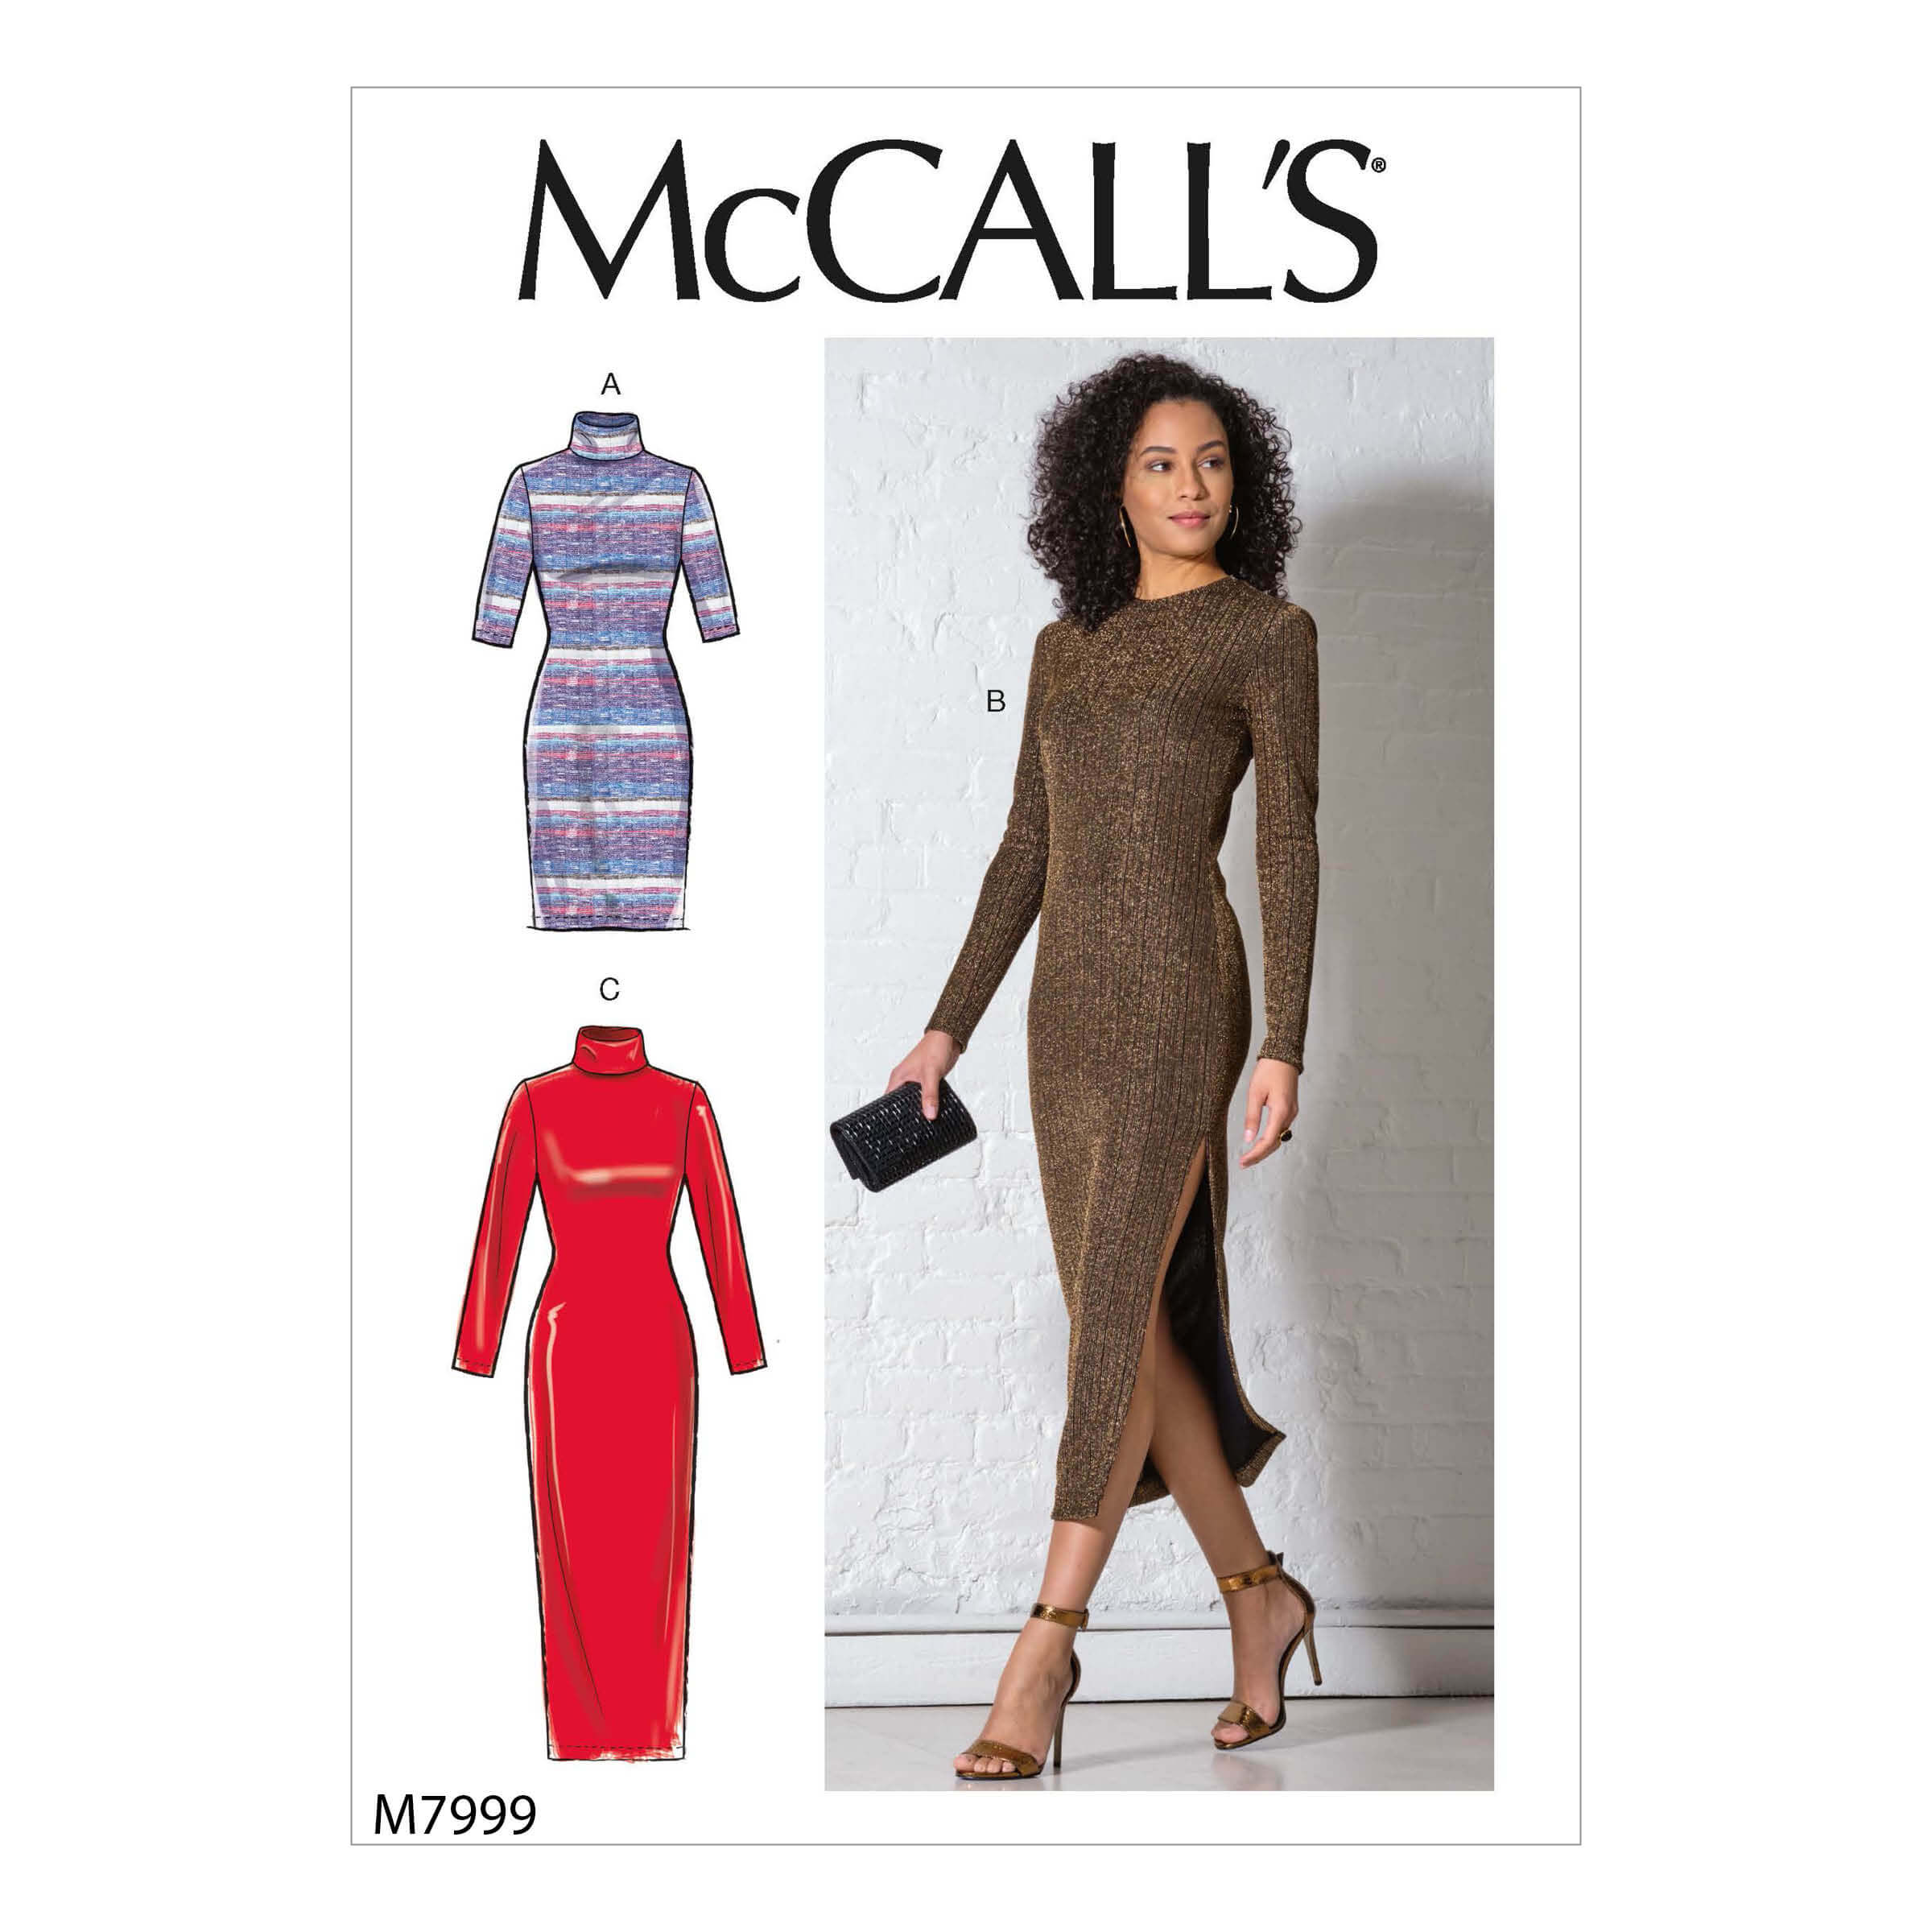 McCall's Sewing Pattern M7999 Misses' Dress